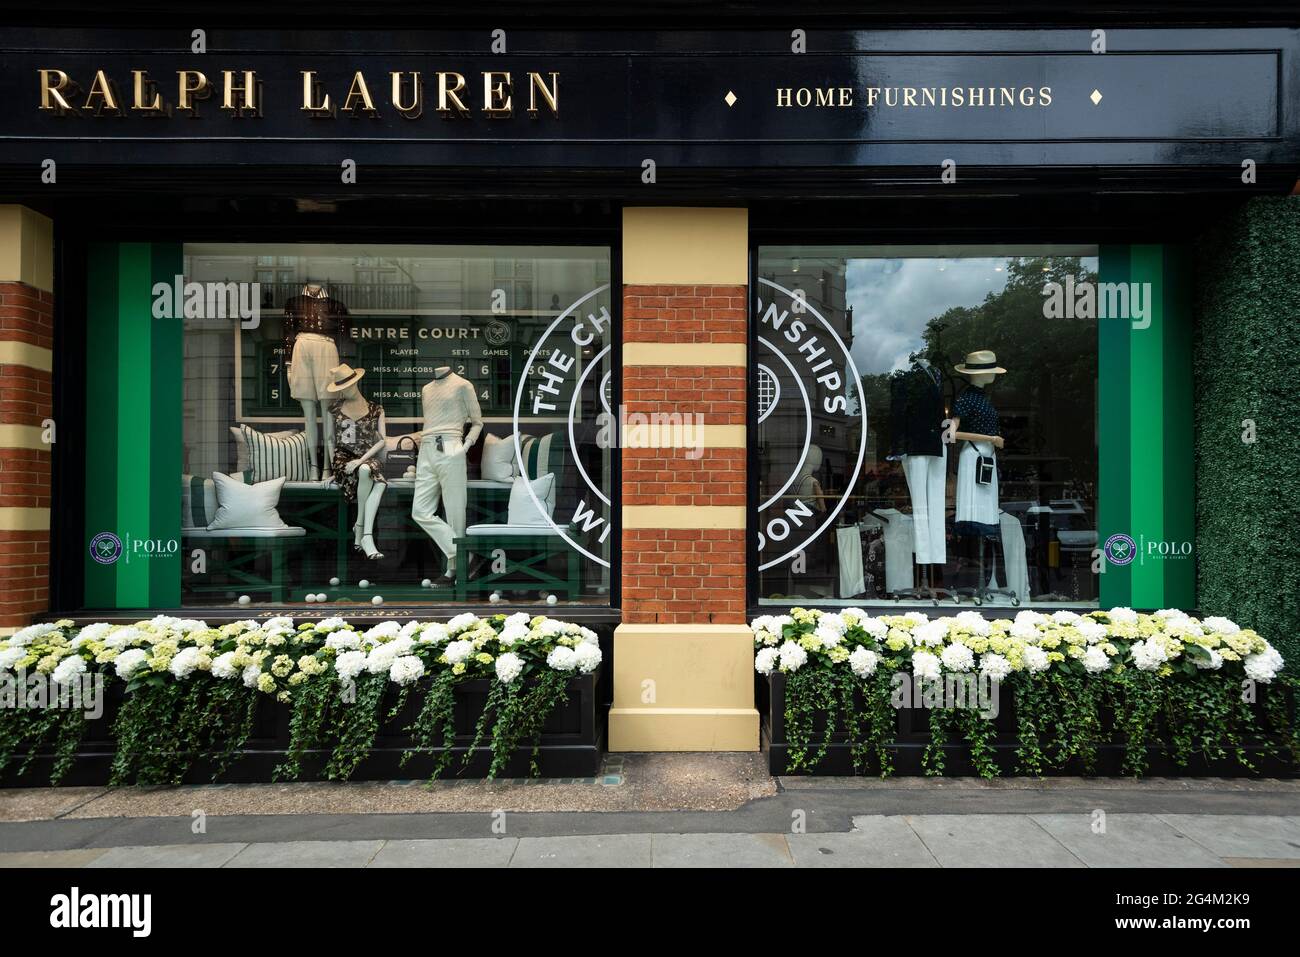 London, UK.  22 June 2021.  The exterior of the Ralph Lauren store in Sloane Square, decorated ahead of this year’s upcoming Wimbledon tennis championships at the All England club. Ralph Lauren supplies outfits for officials at the event.  Lockdown restrictions will limit crowds, but the finals will be at full capacity when restrictions are relaxed.  Credit: Stephen Chung / Alamy Live News Stock Photo